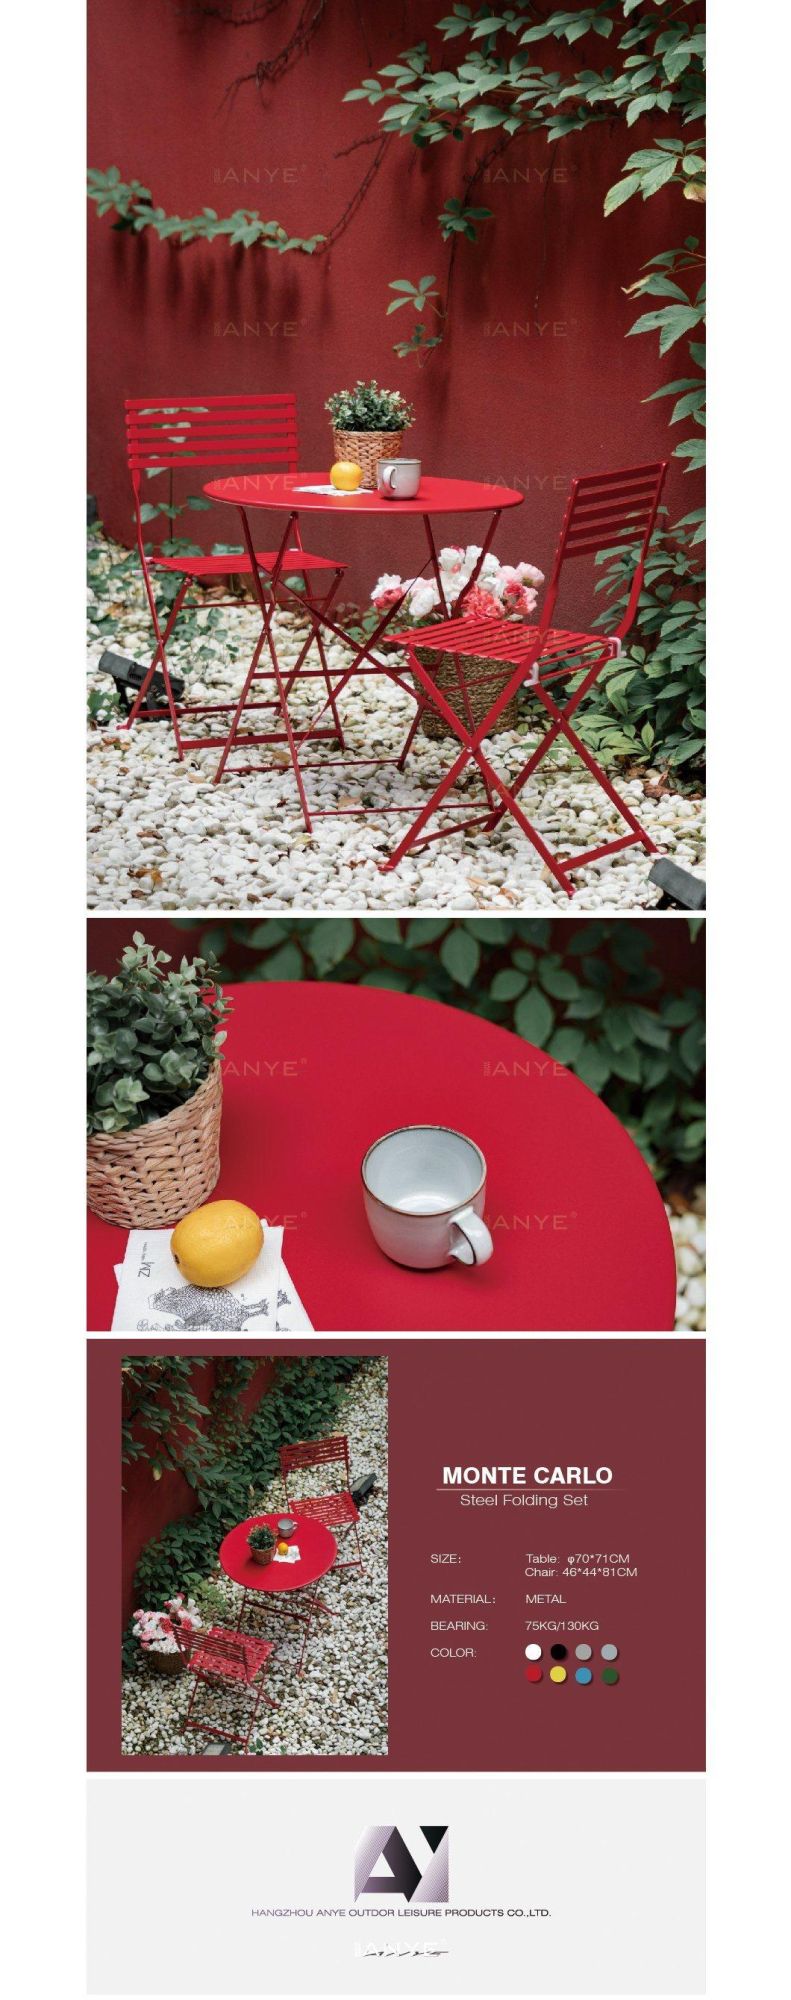 Red Metal Furniture Gardening Item Portable Outdoor Round Dining Table Folding Chair